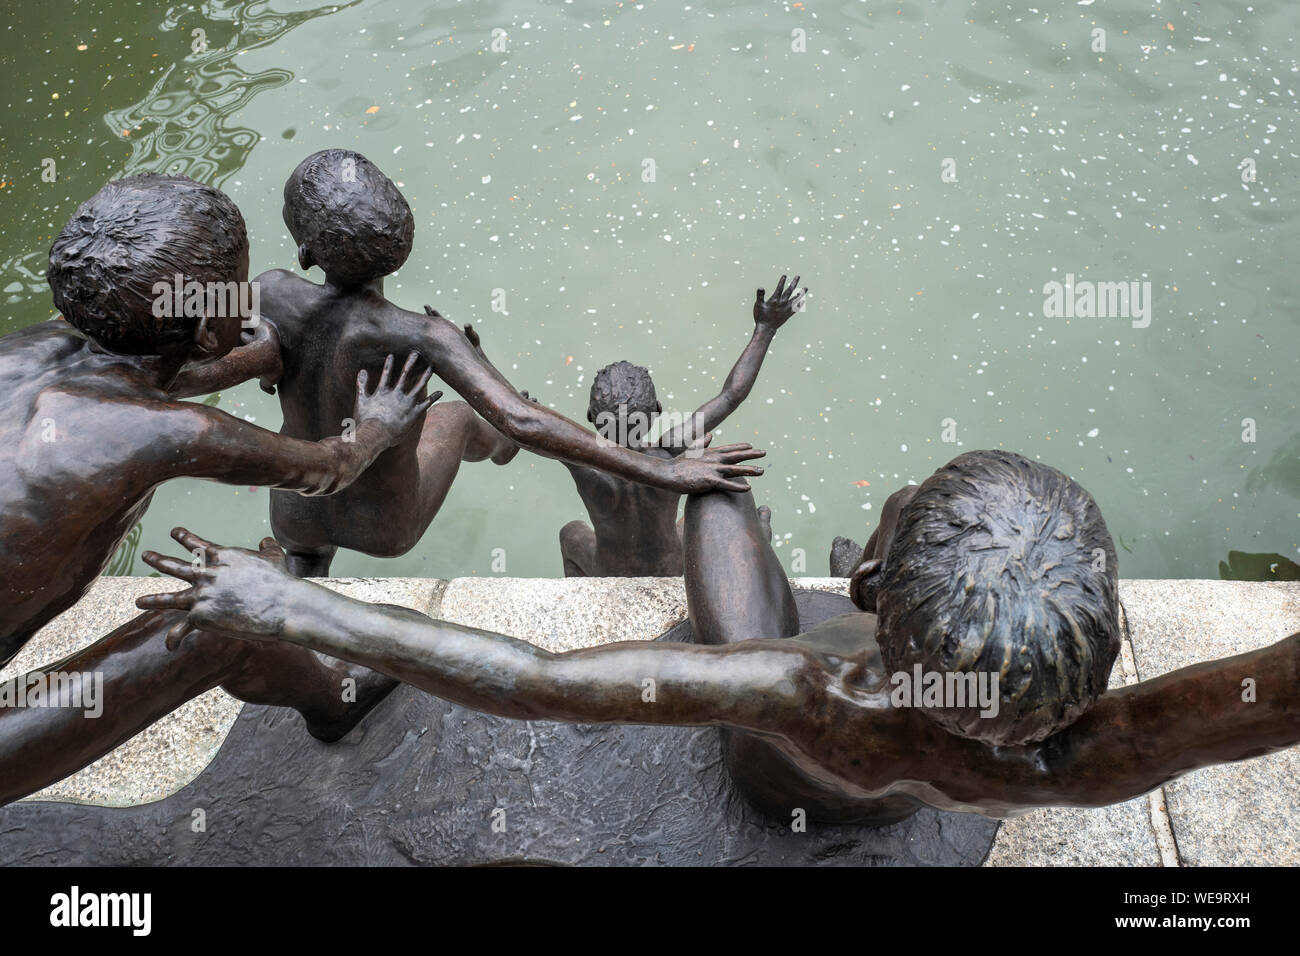 First Generation bronze sculptures as part of the People of the River series by artist Chong Fah Cheong on the Singapore River, Singapore Stock Photo